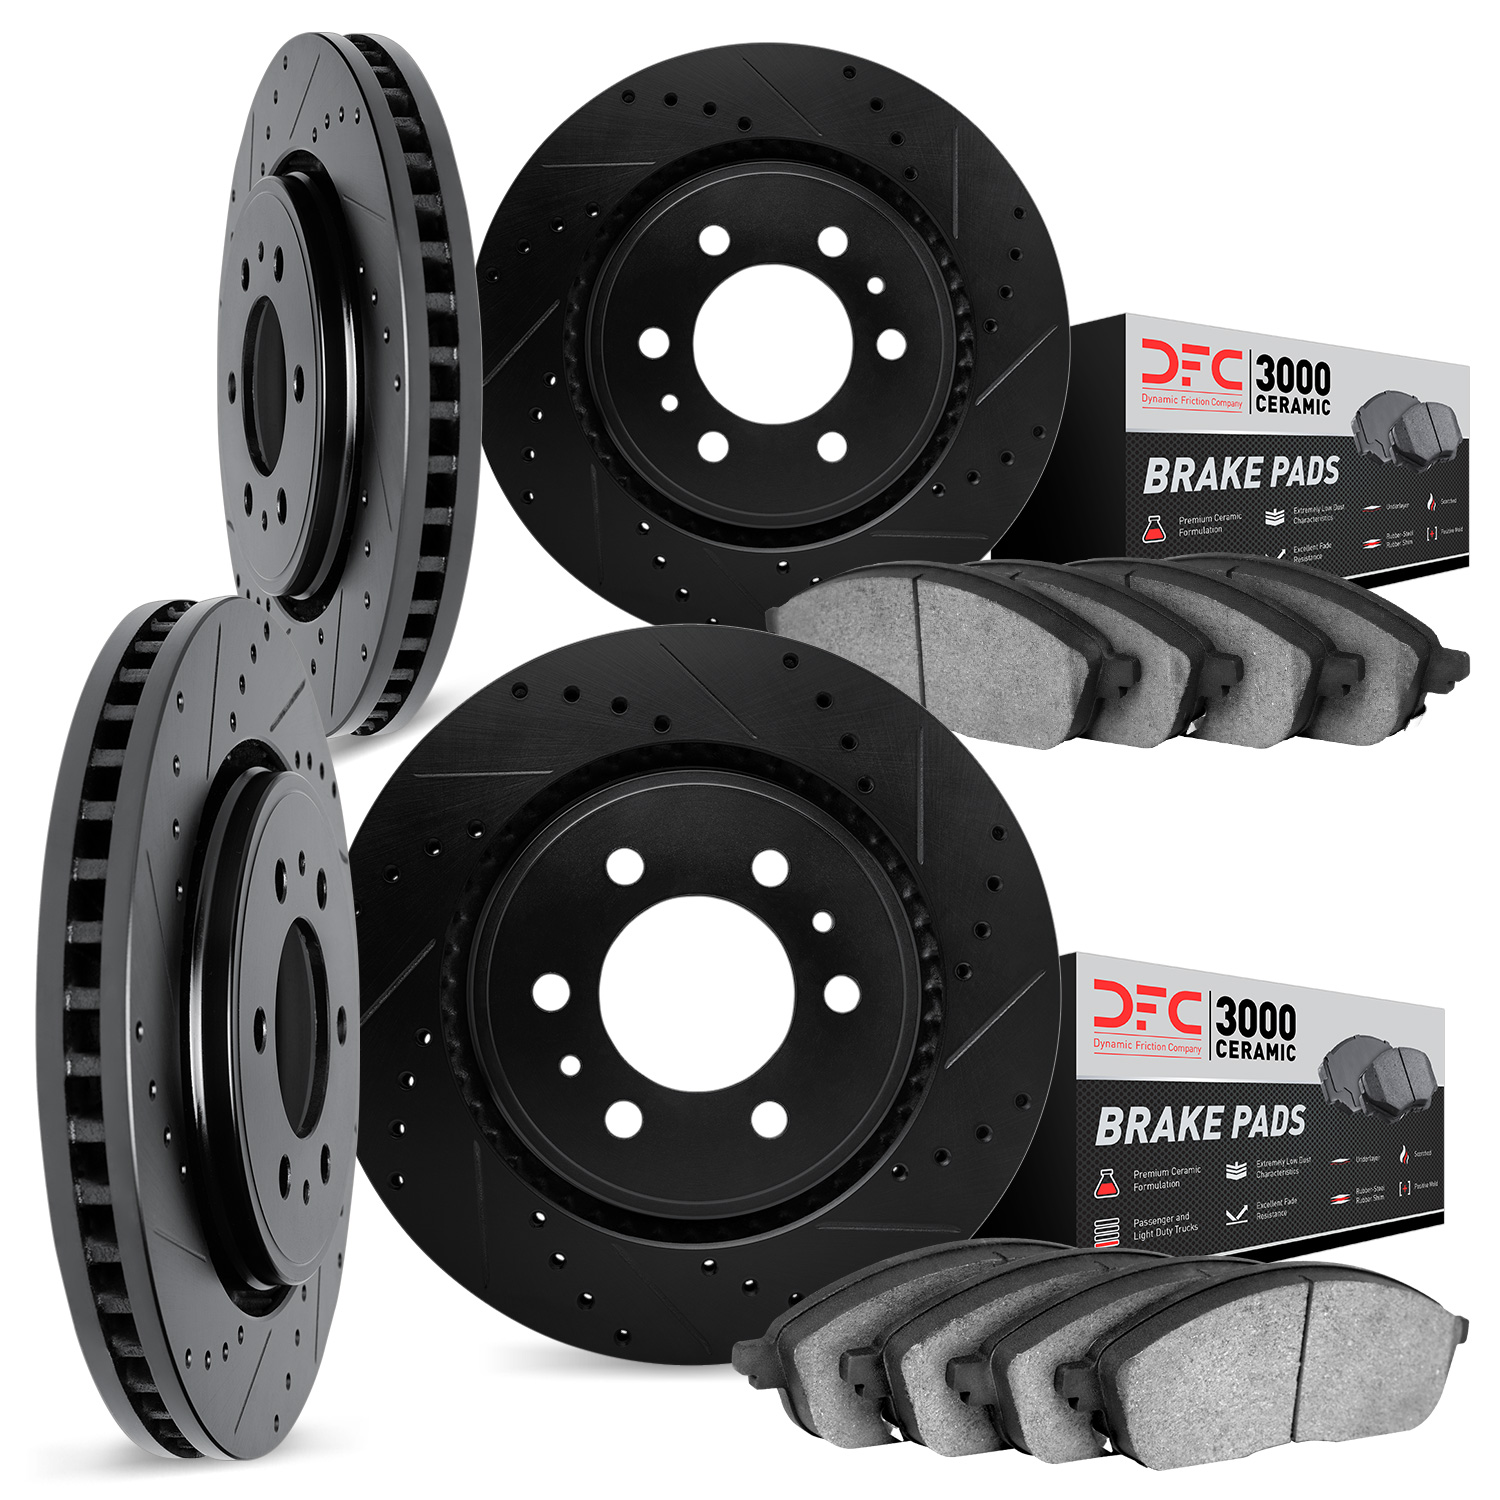 8304-48026 Drilled/Slotted Brake Rotors with 3000-Series Ceramic Brake Pads Kit [Black], 2006-2009 GM, Position: Front and Rear